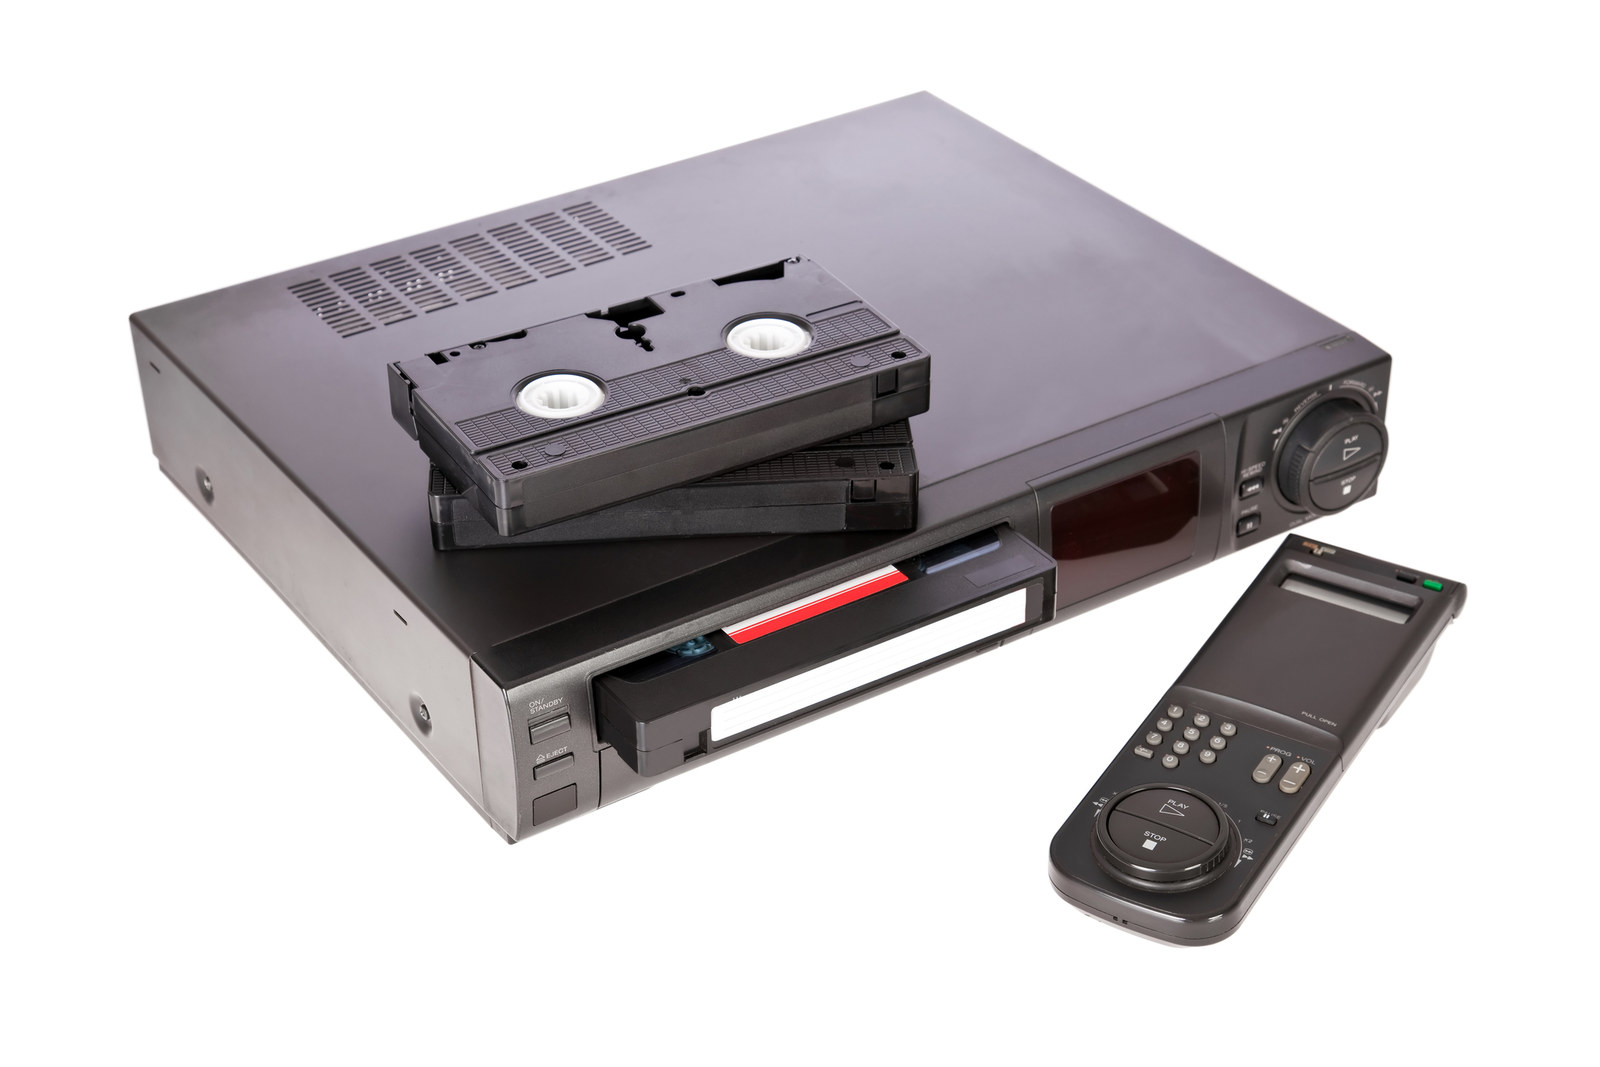 A stock photo of a VCR with VHS tape being ejected